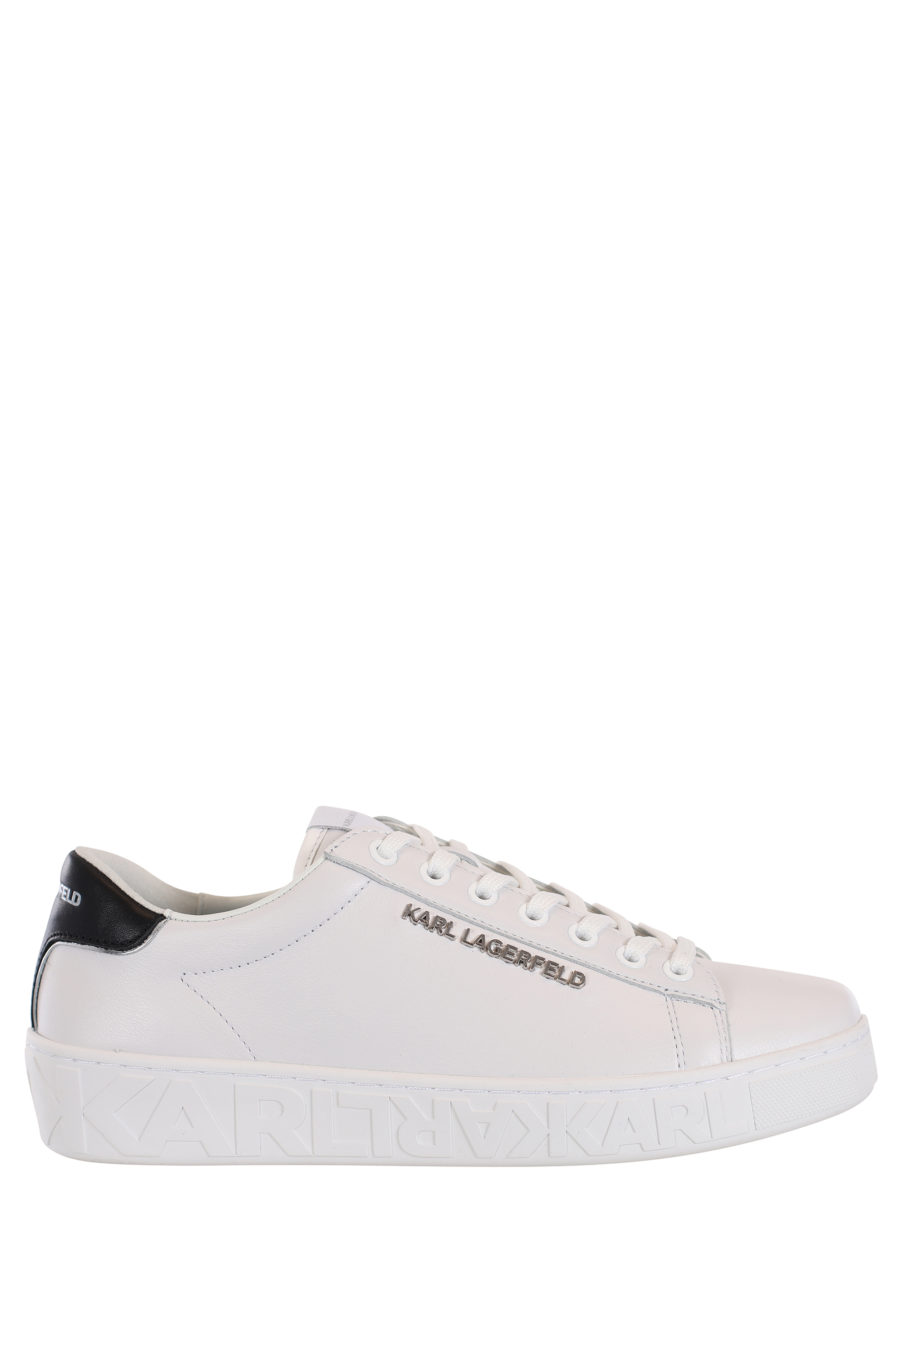 White trainers with silver metal "Lettering" logo - IMG 0025